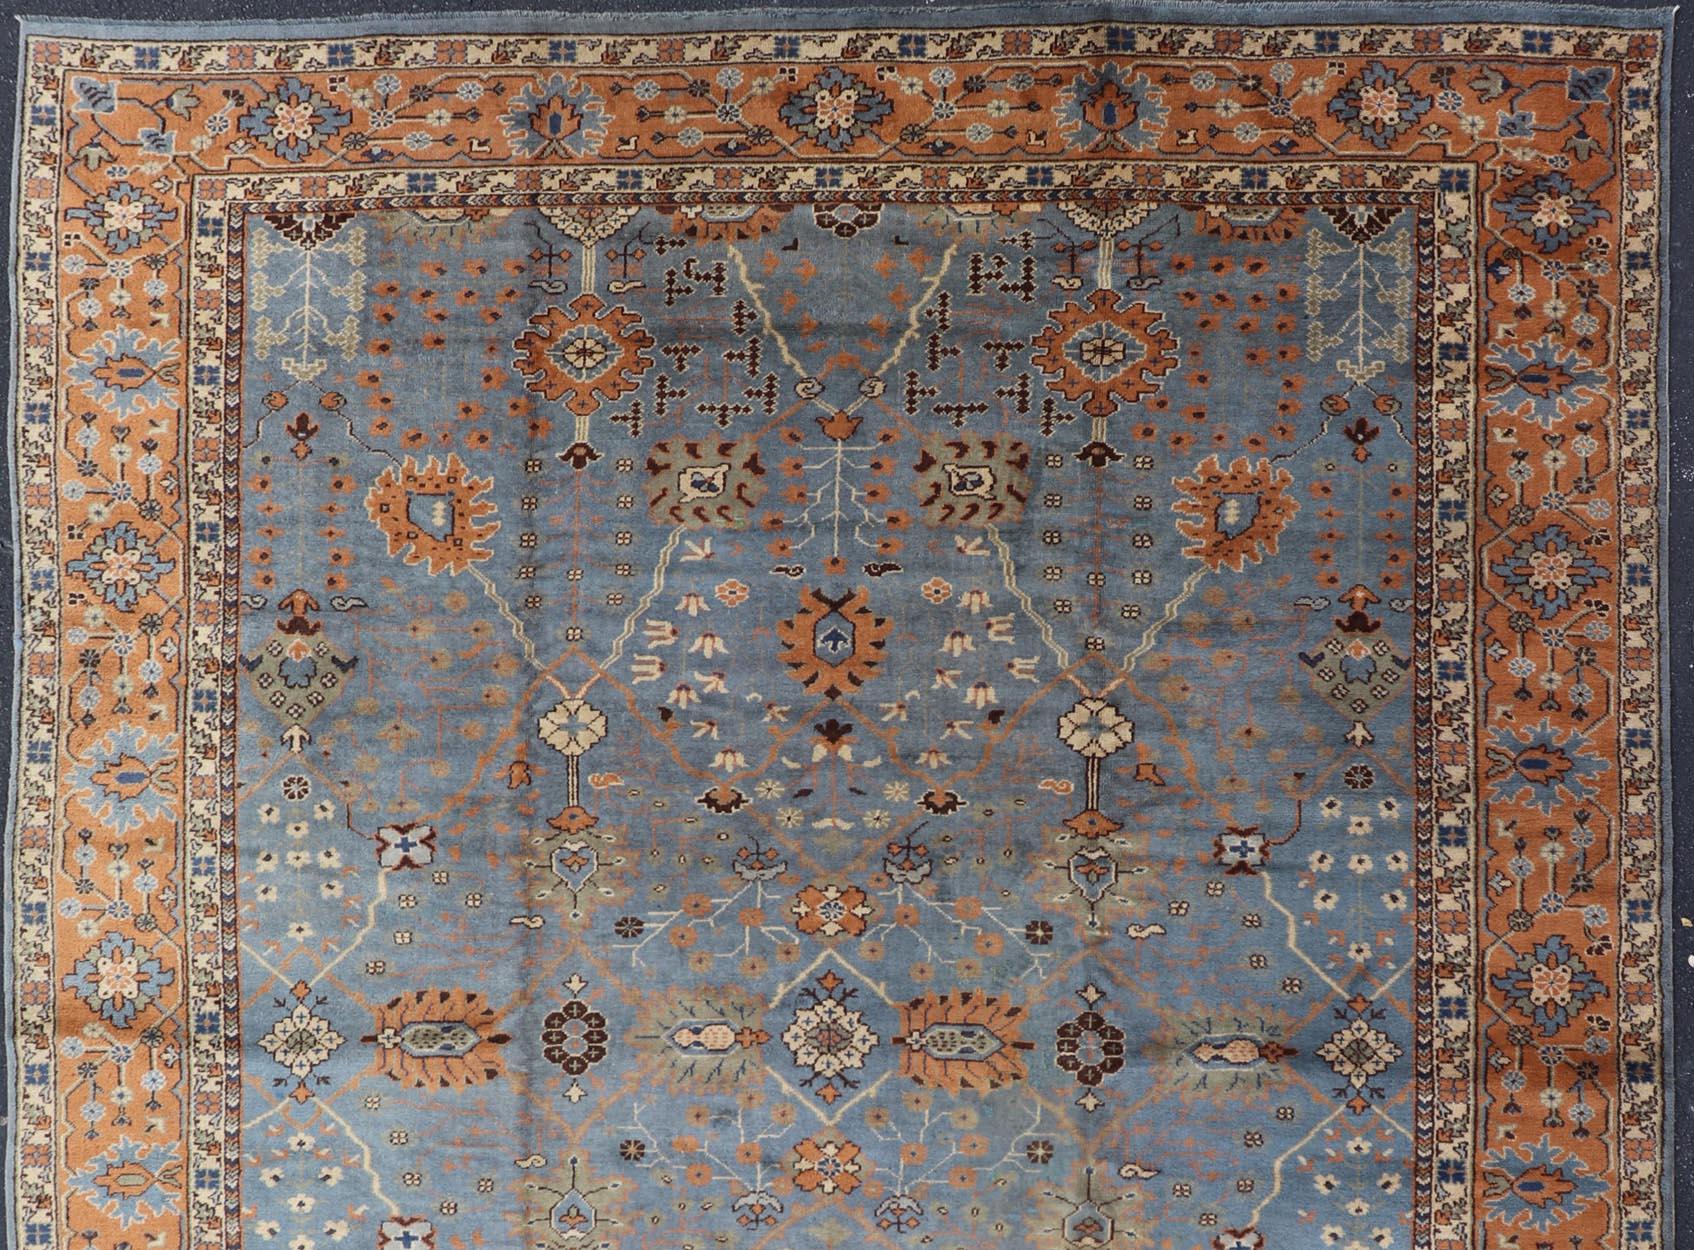 Keivan Woven Arts Antique Turkish All Over Oushak Rug in Blue Background & light Cognac Colored Border . Keivan Woven Arts / rug 16-1006, country of origin / type: Turkey / Oushak, circa Early-20th Century.

Measures: 9'8 x 13'3

Floral and